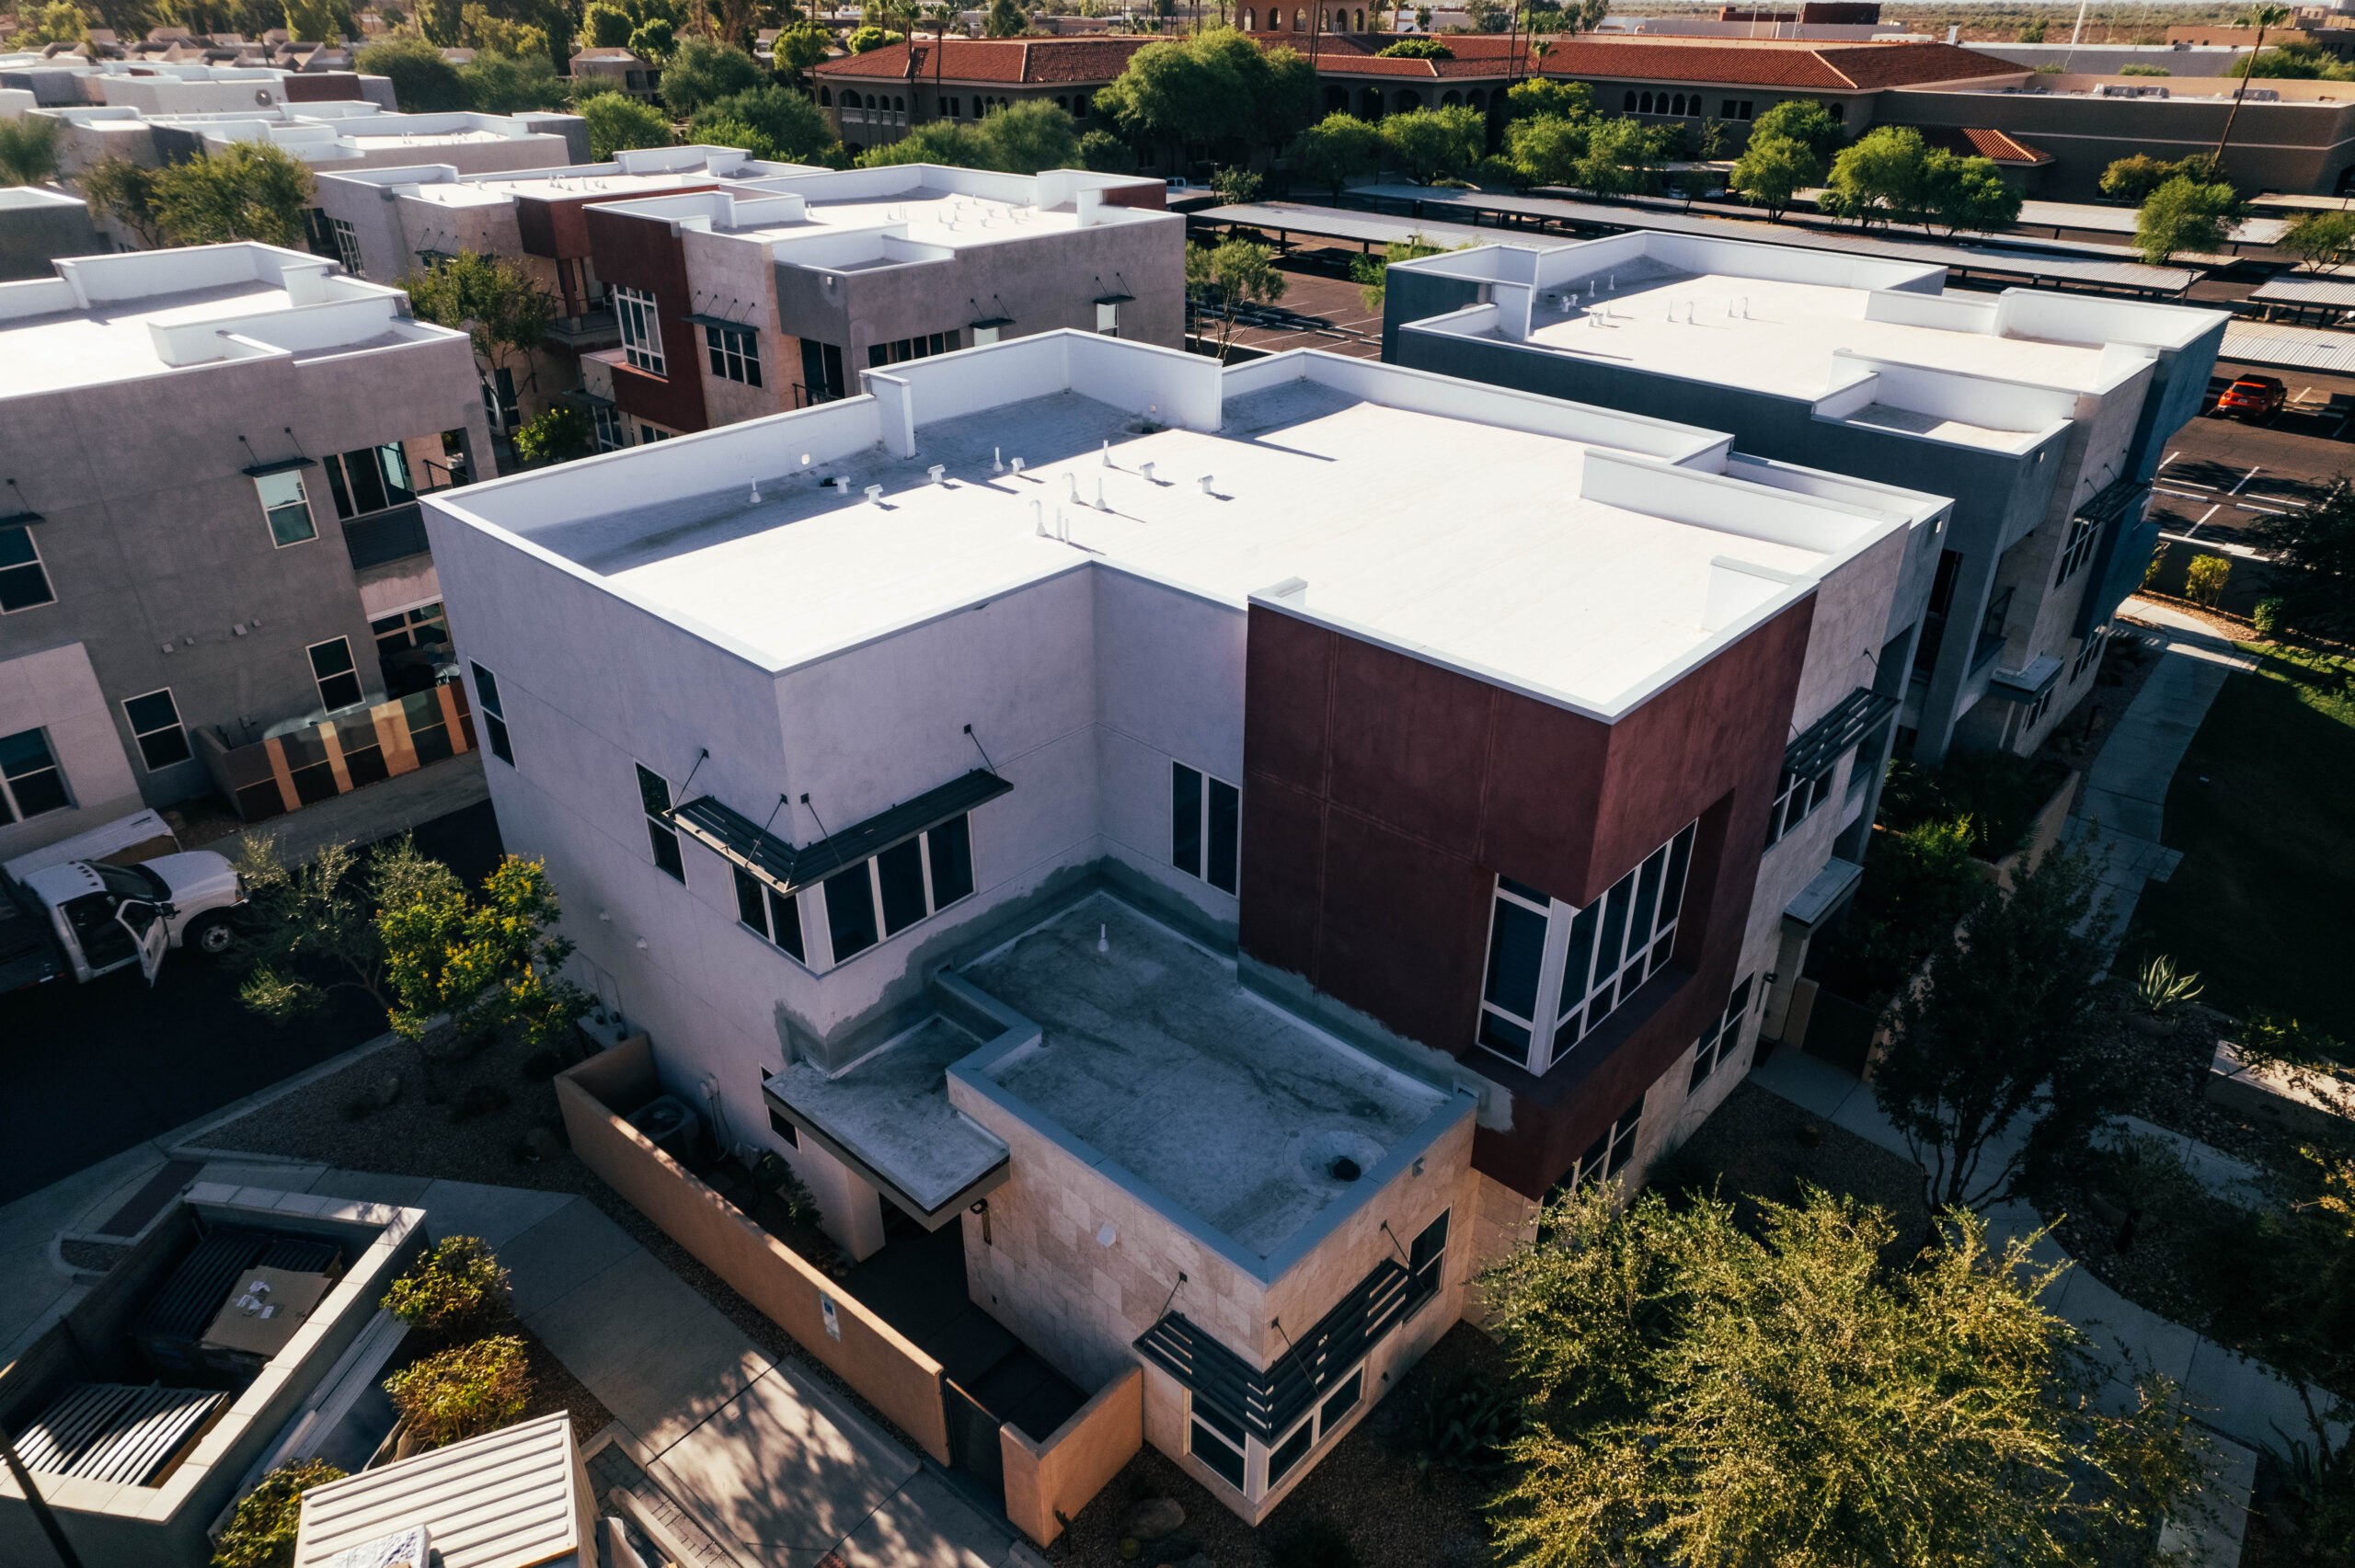 Aerial perspective of a freshly coated flat roof in Estancia, Arizona.